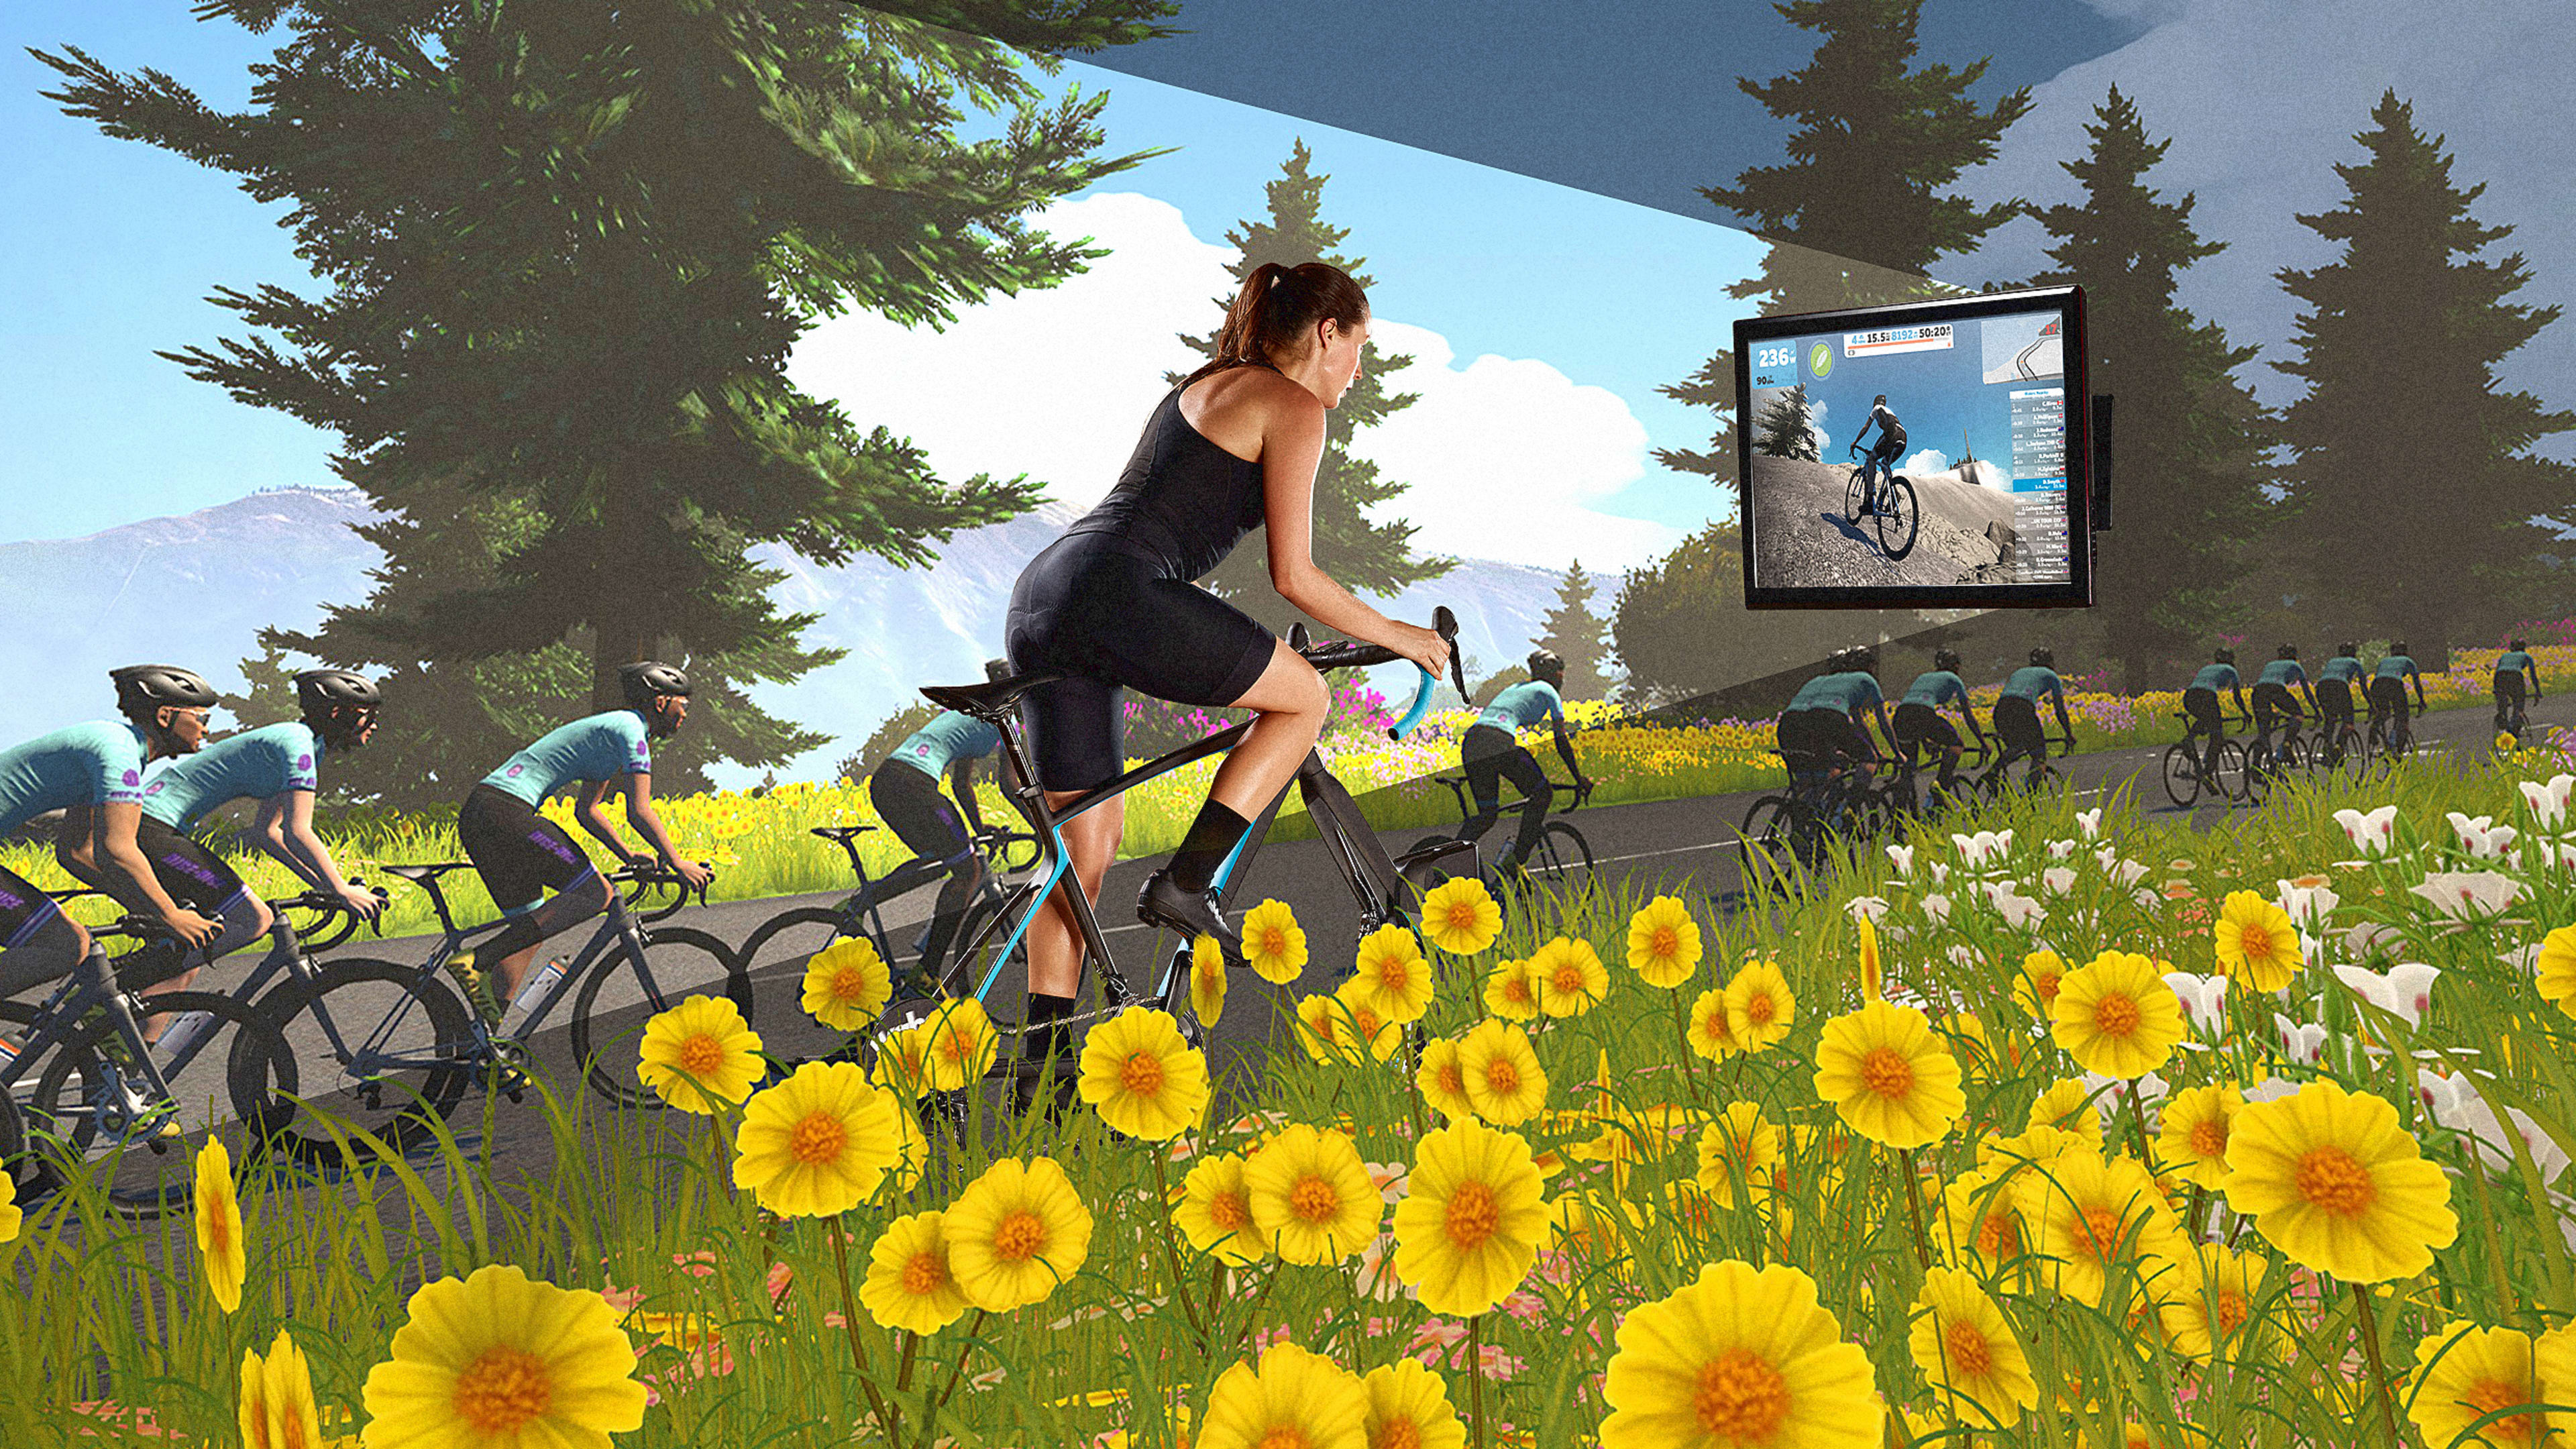 The Tour de France goes virtual, as e-cycling takes off during quarantine